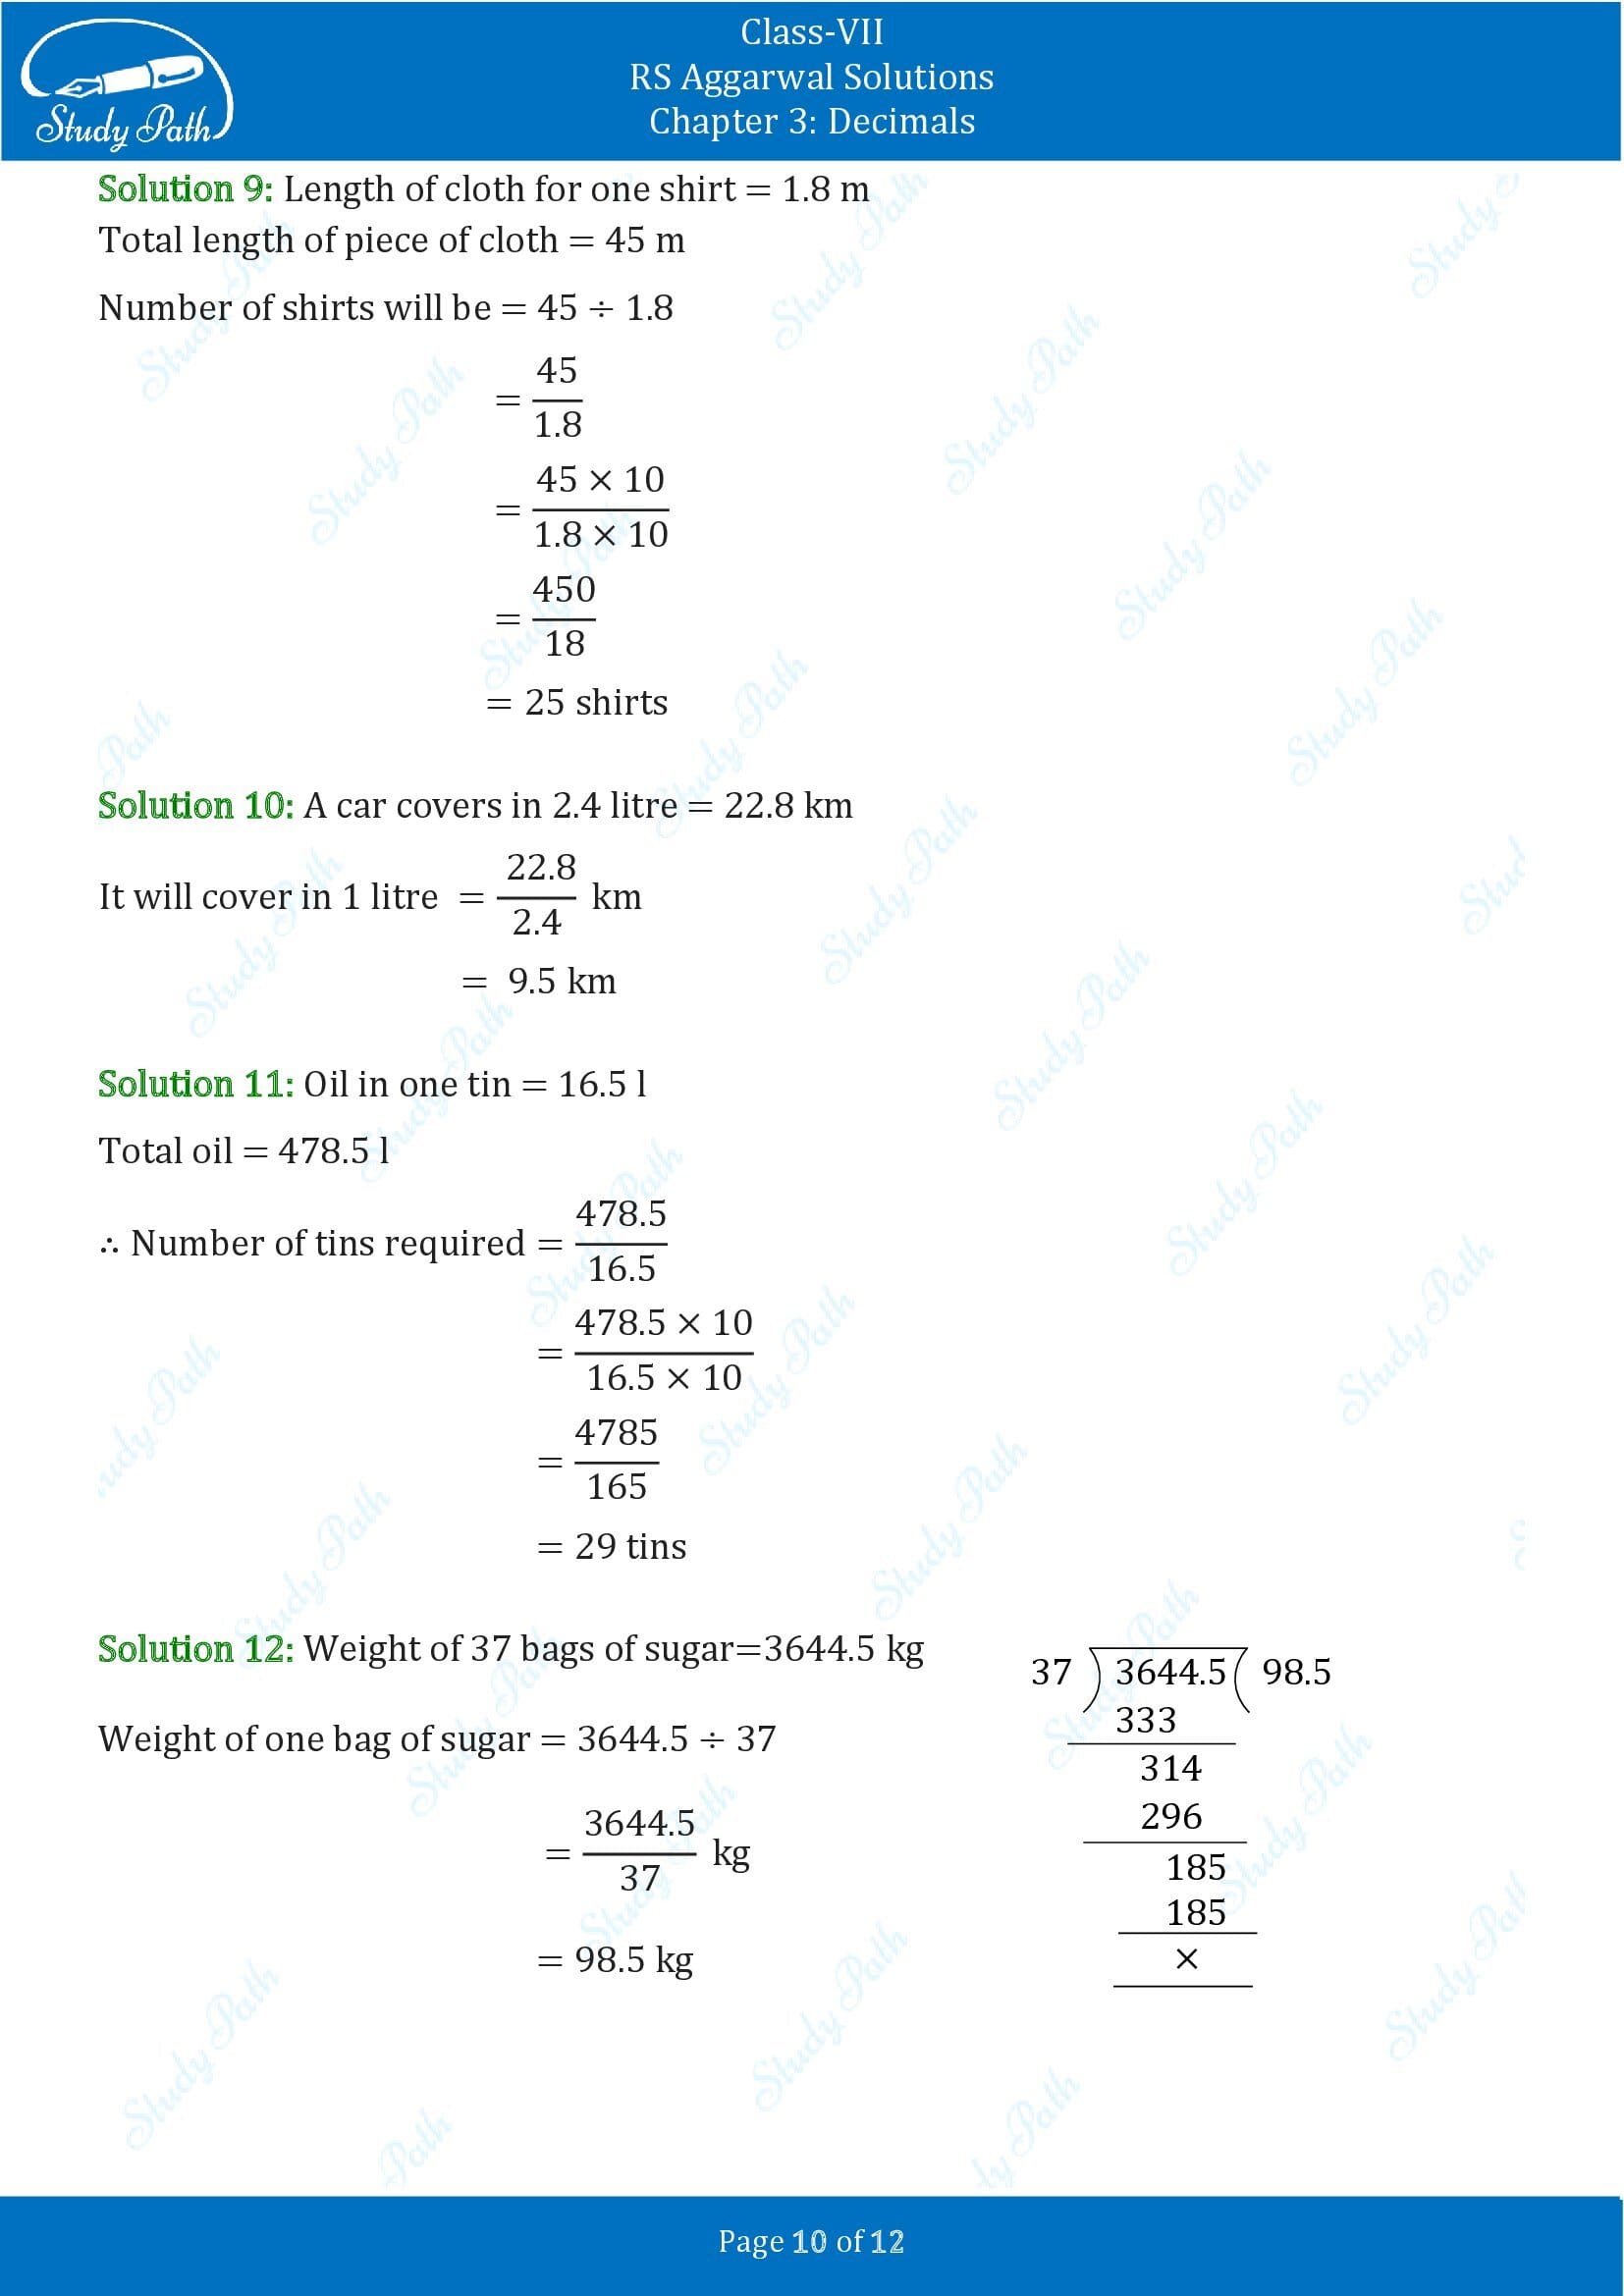 RS Aggarwal Solutions Class 7 Chapter 3 Decimals Exercise 3D 00010